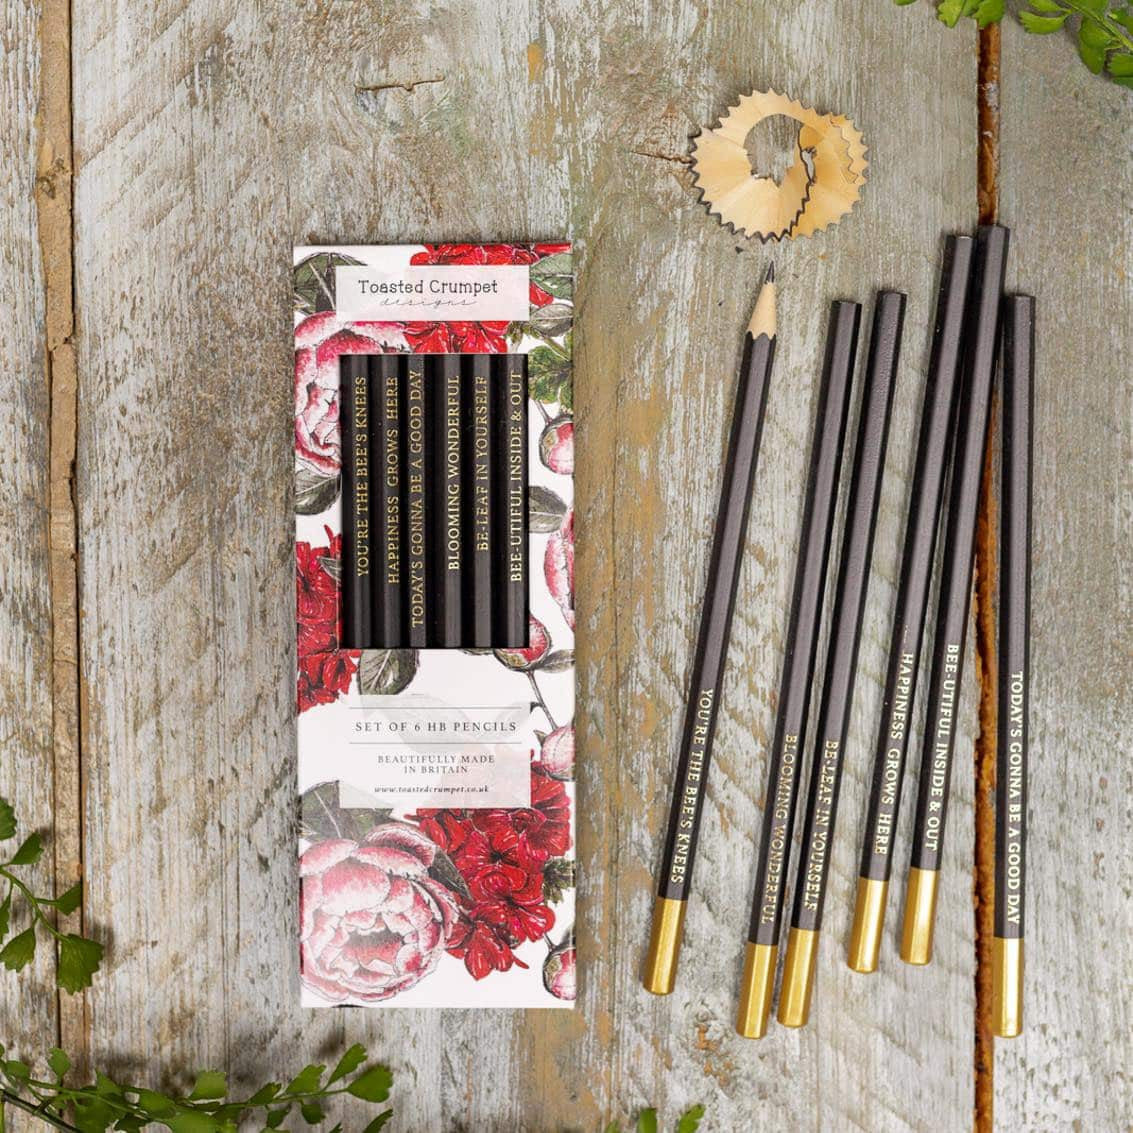 In Full Bloom Set of 6 Pencils by Toasted Crumpet